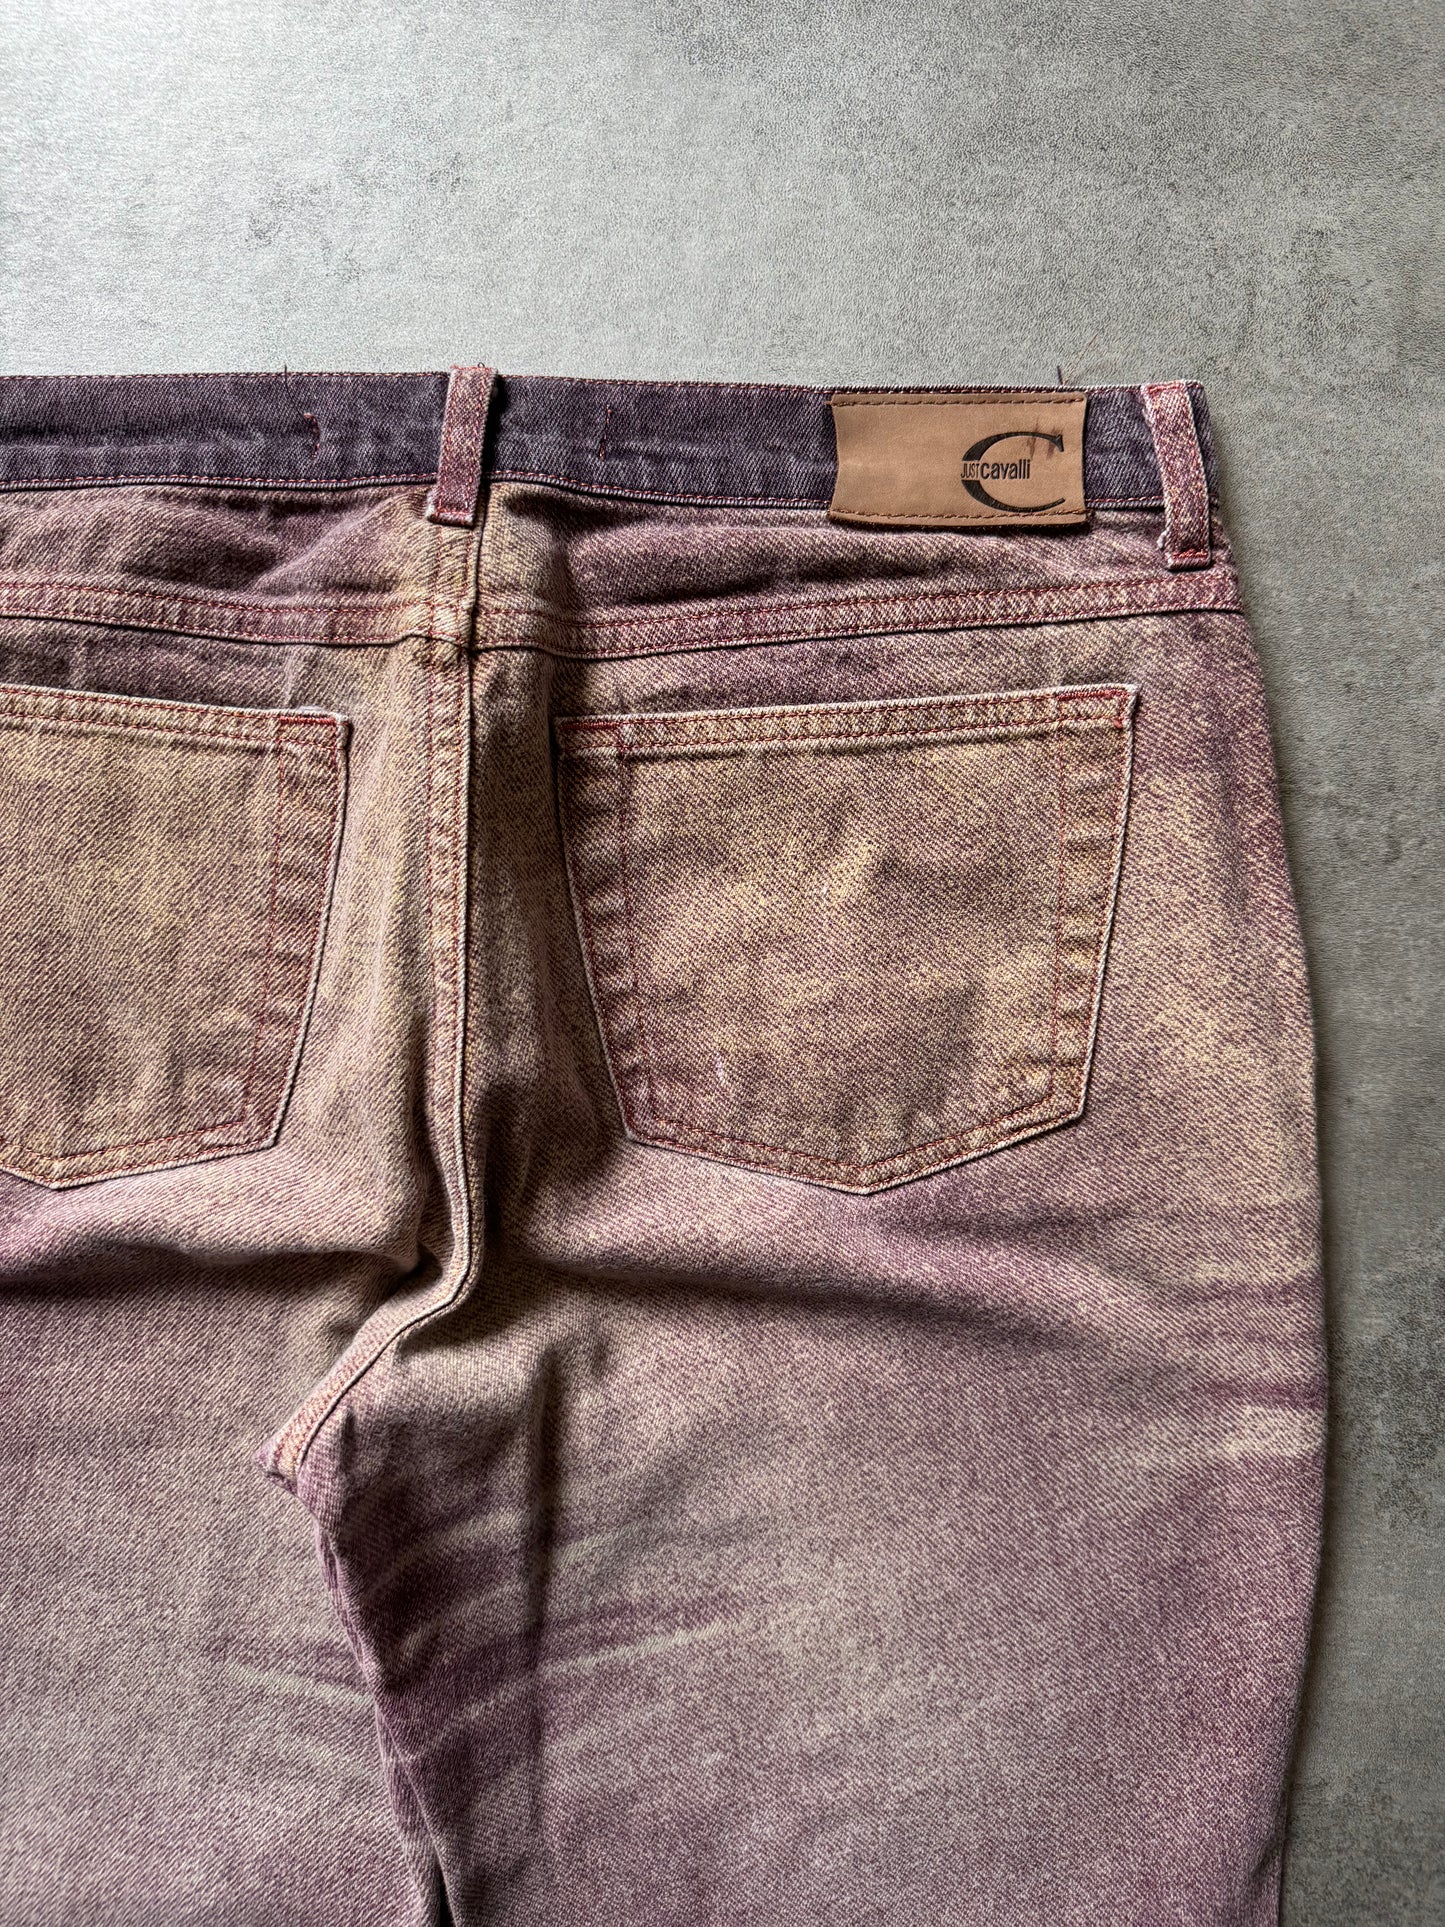 SS2004 Cavalli Faded Purple Relaxed Pants (M) - 3